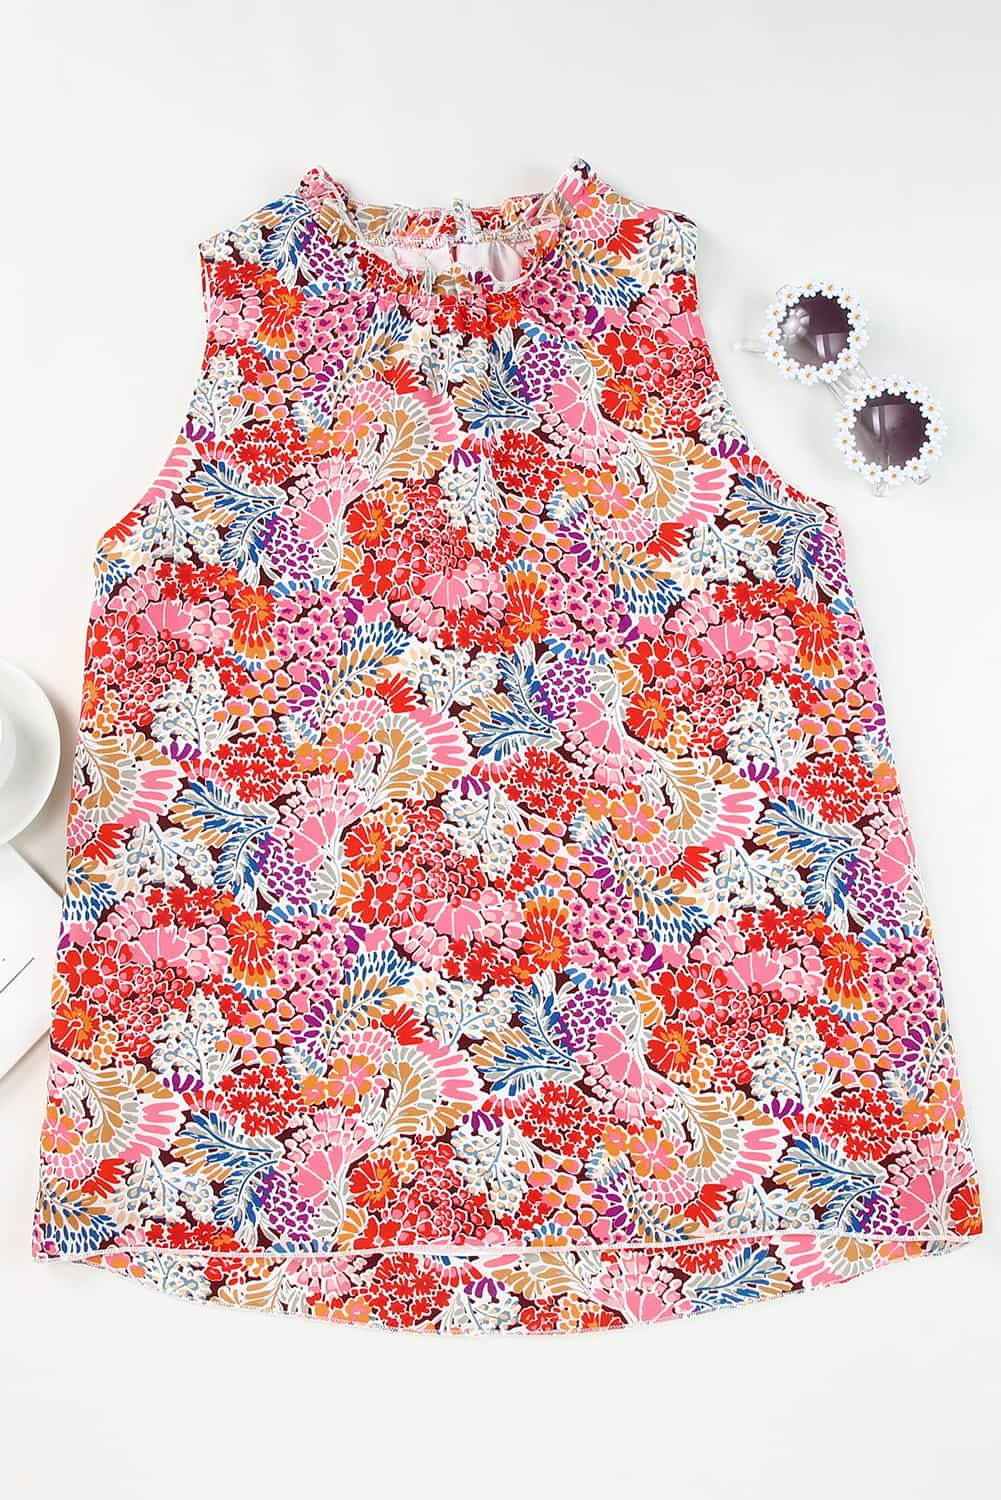 Multicolor Floral Print Casual Sleeveless Shirt for Women